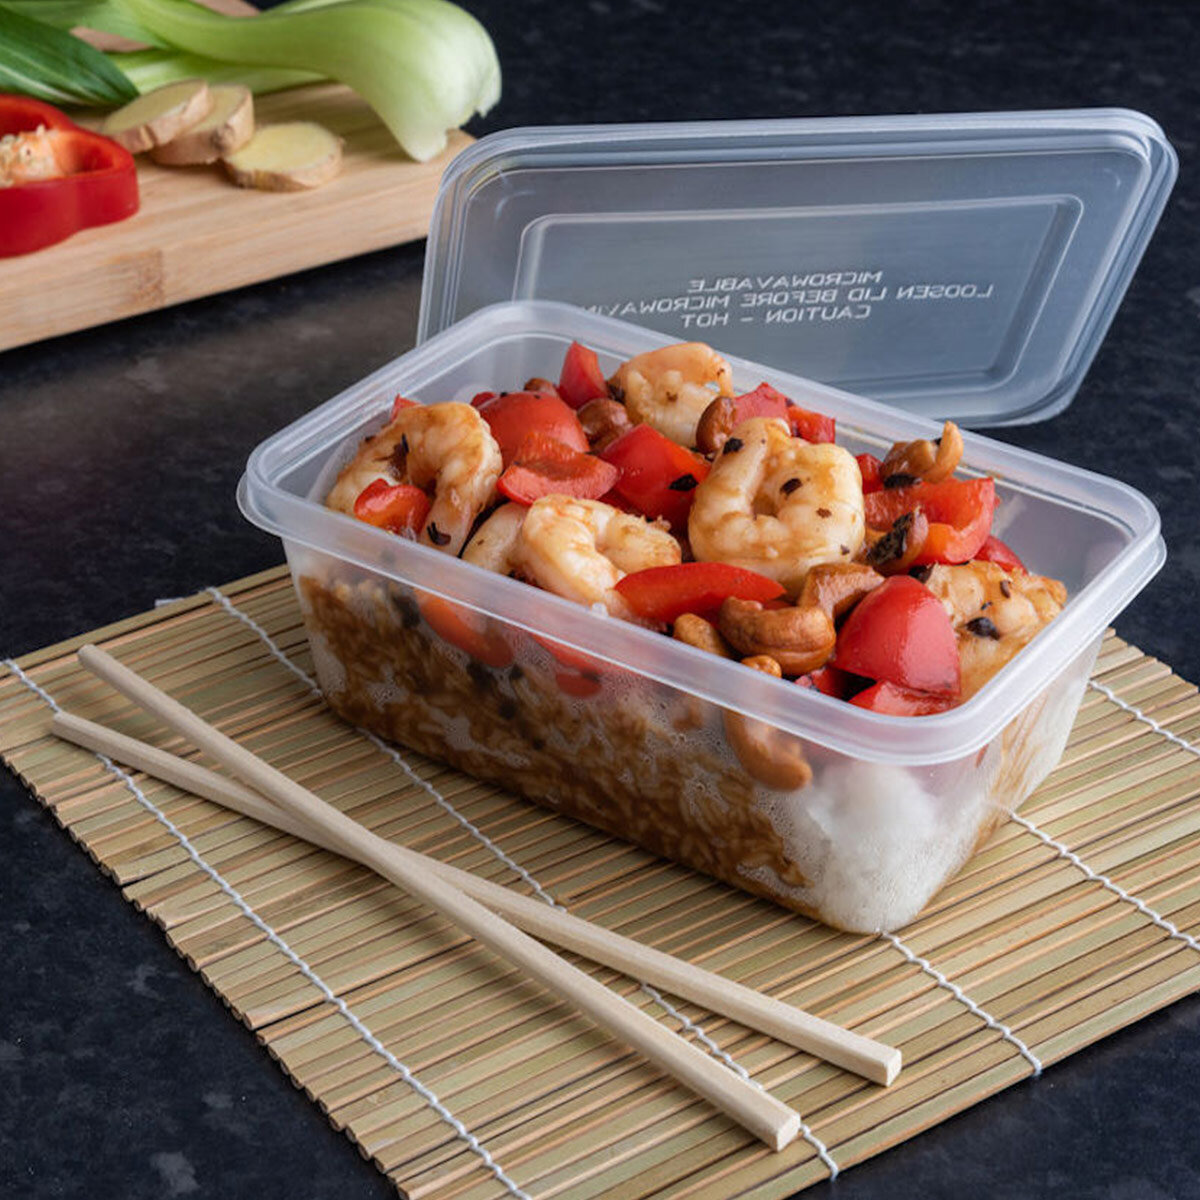 650ml Plastic Food Containers Tubs Clear With Lids Microwave Safe